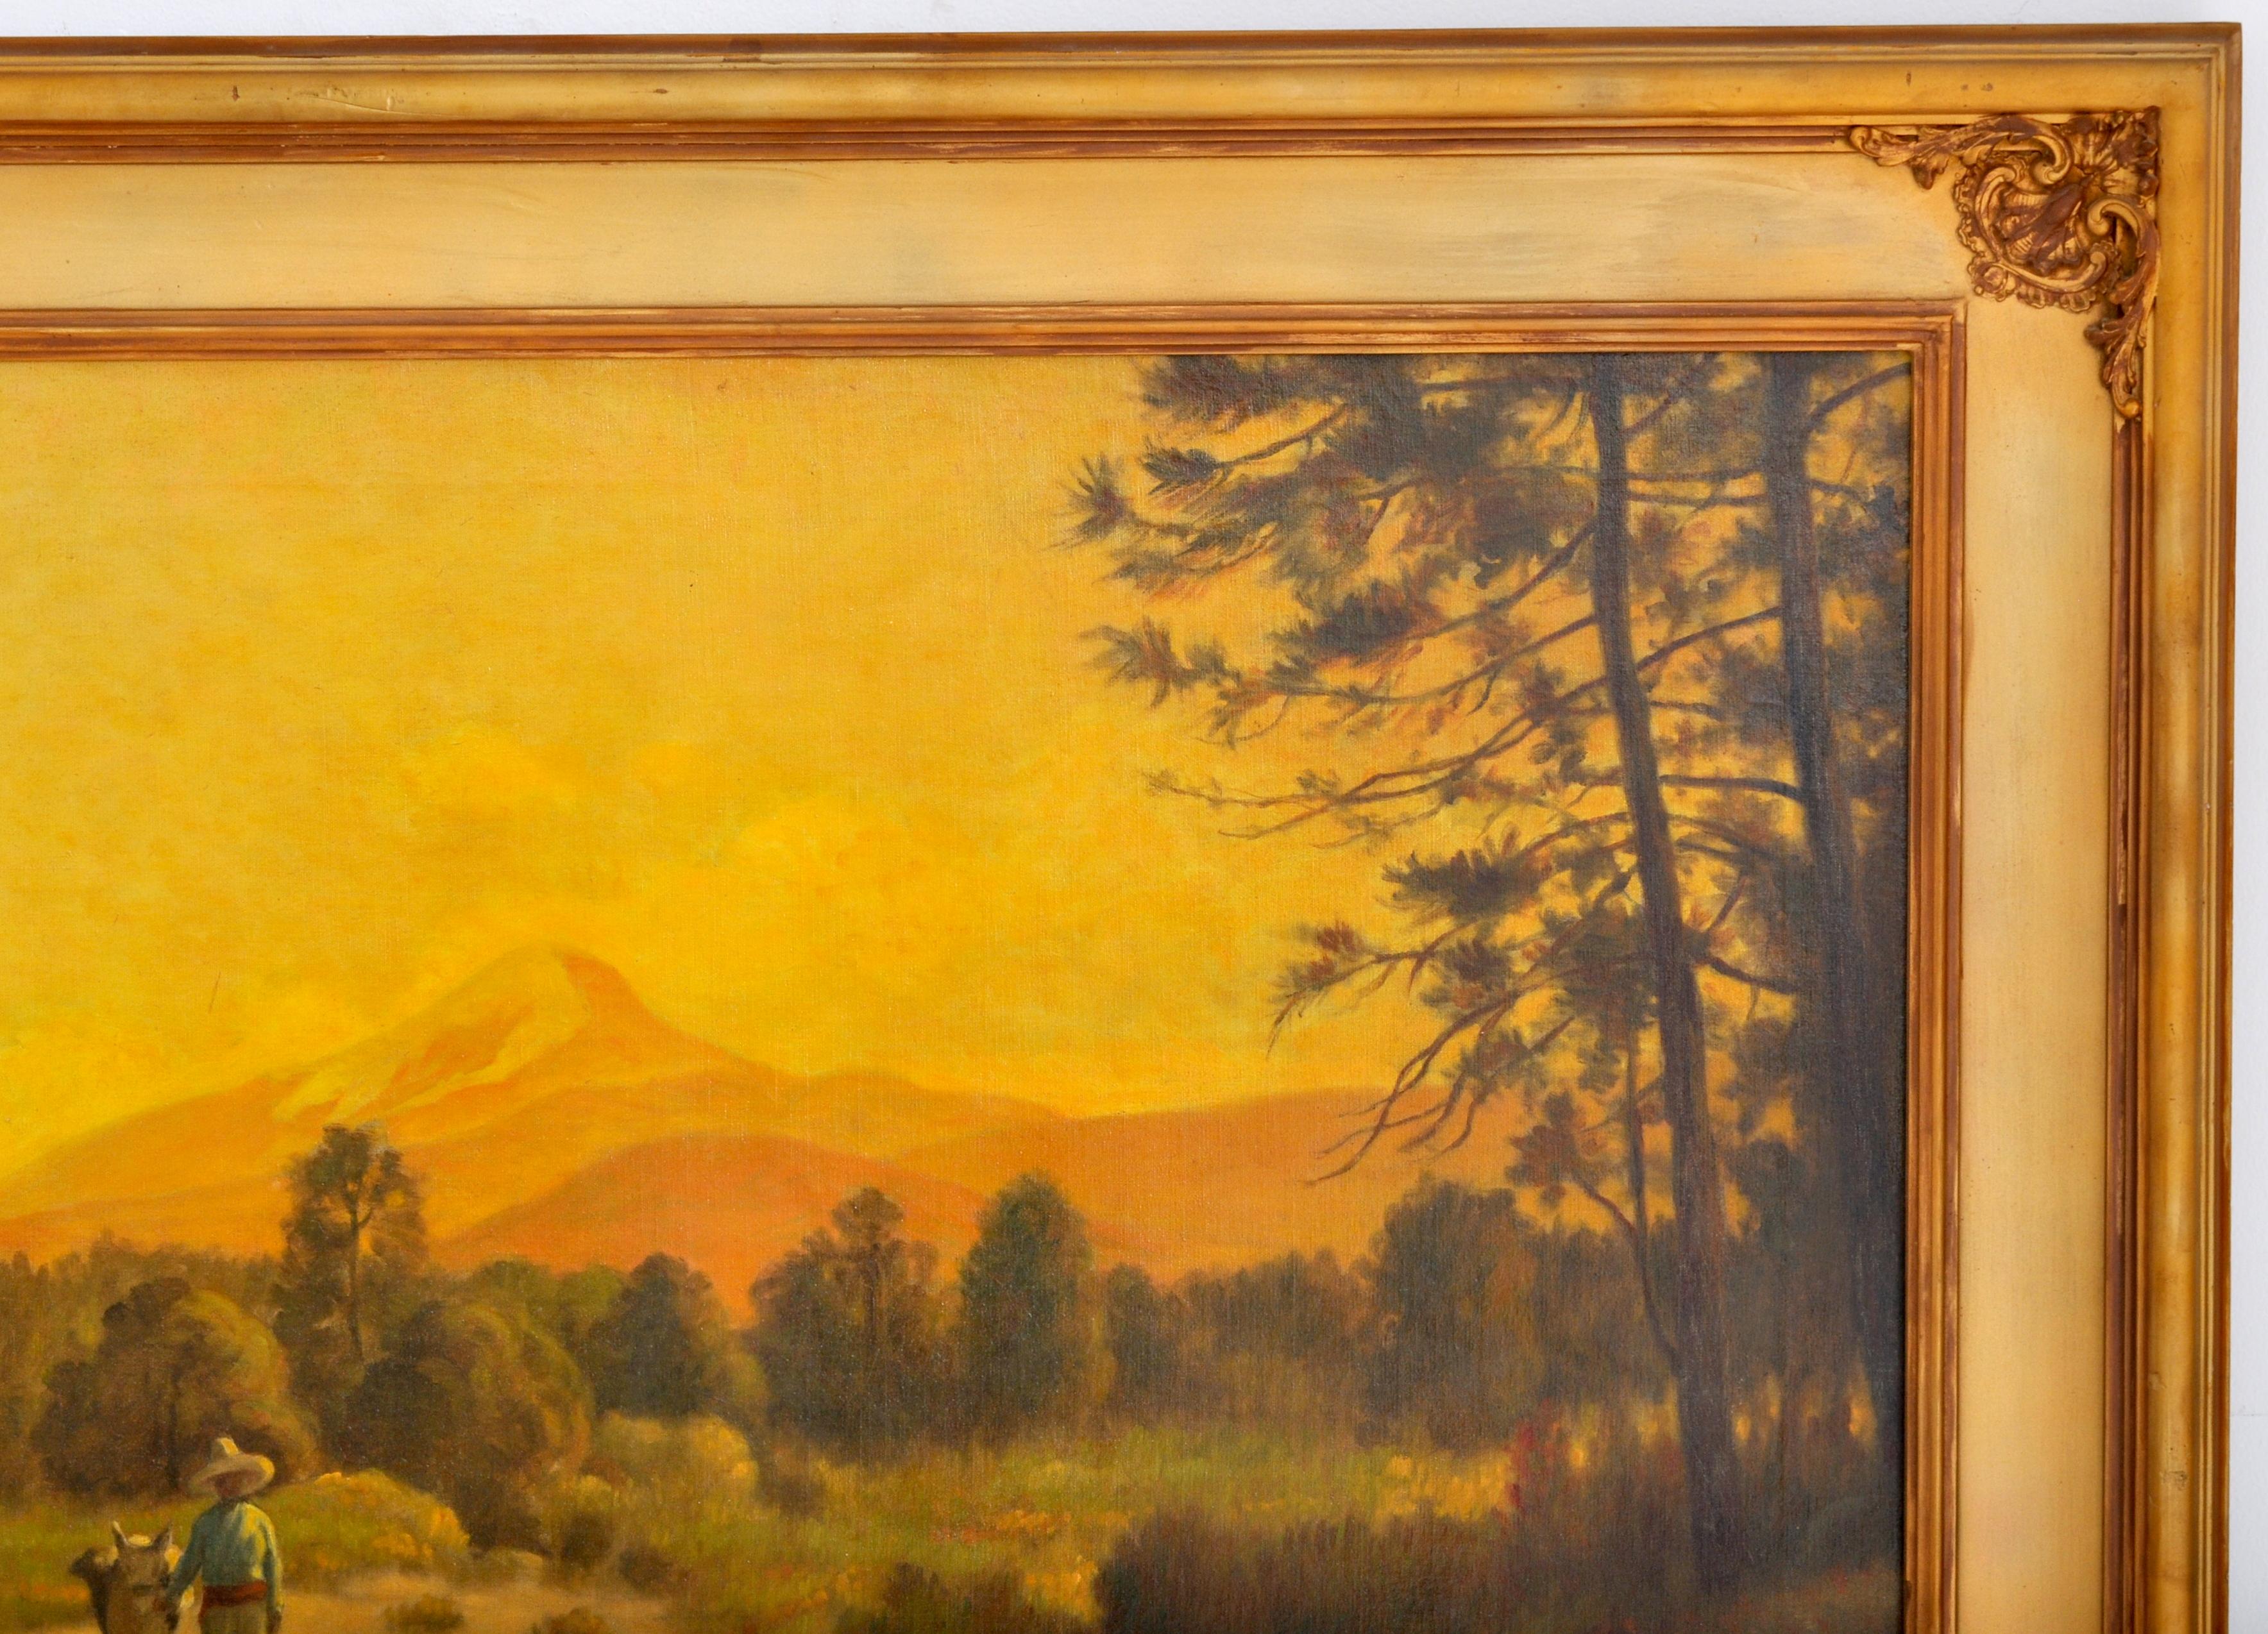 Antique American Oil on Canvas by Charles Holloway South American Landscape 1915 For Sale 4